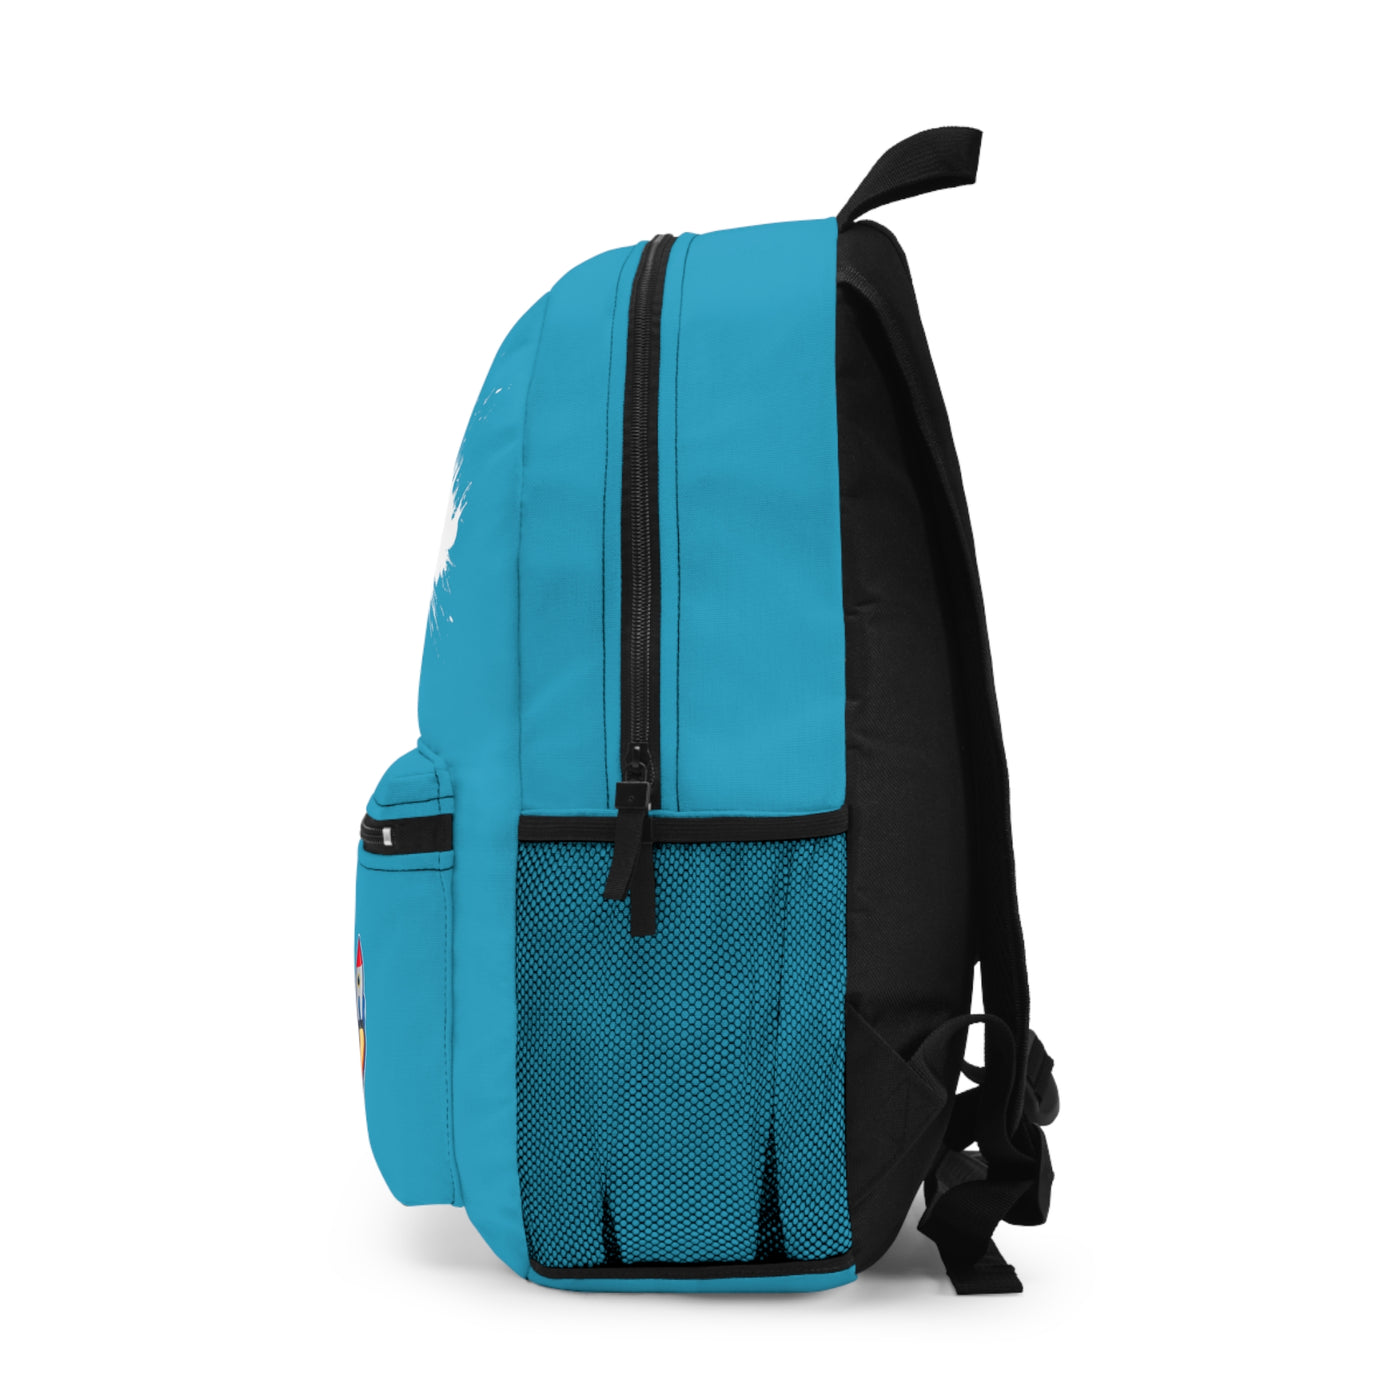 King Moore World Backpack (Turquoise)